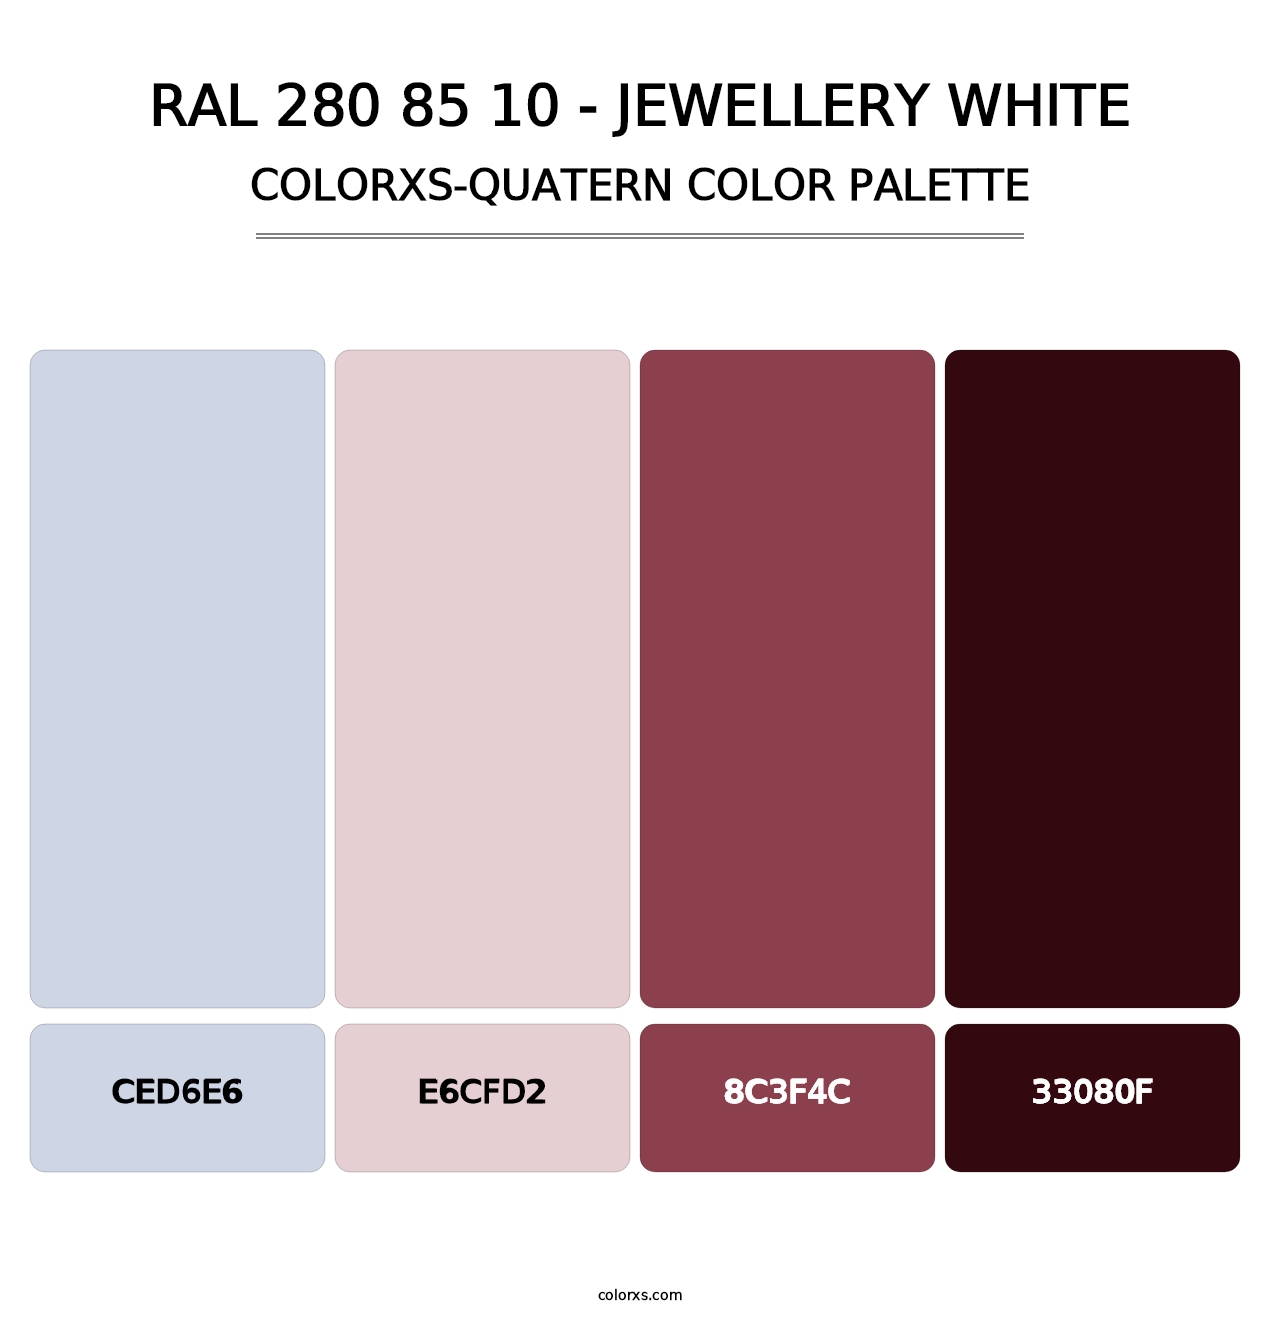 RAL 280 85 10 - Jewellery White - Colorxs Quatern Palette